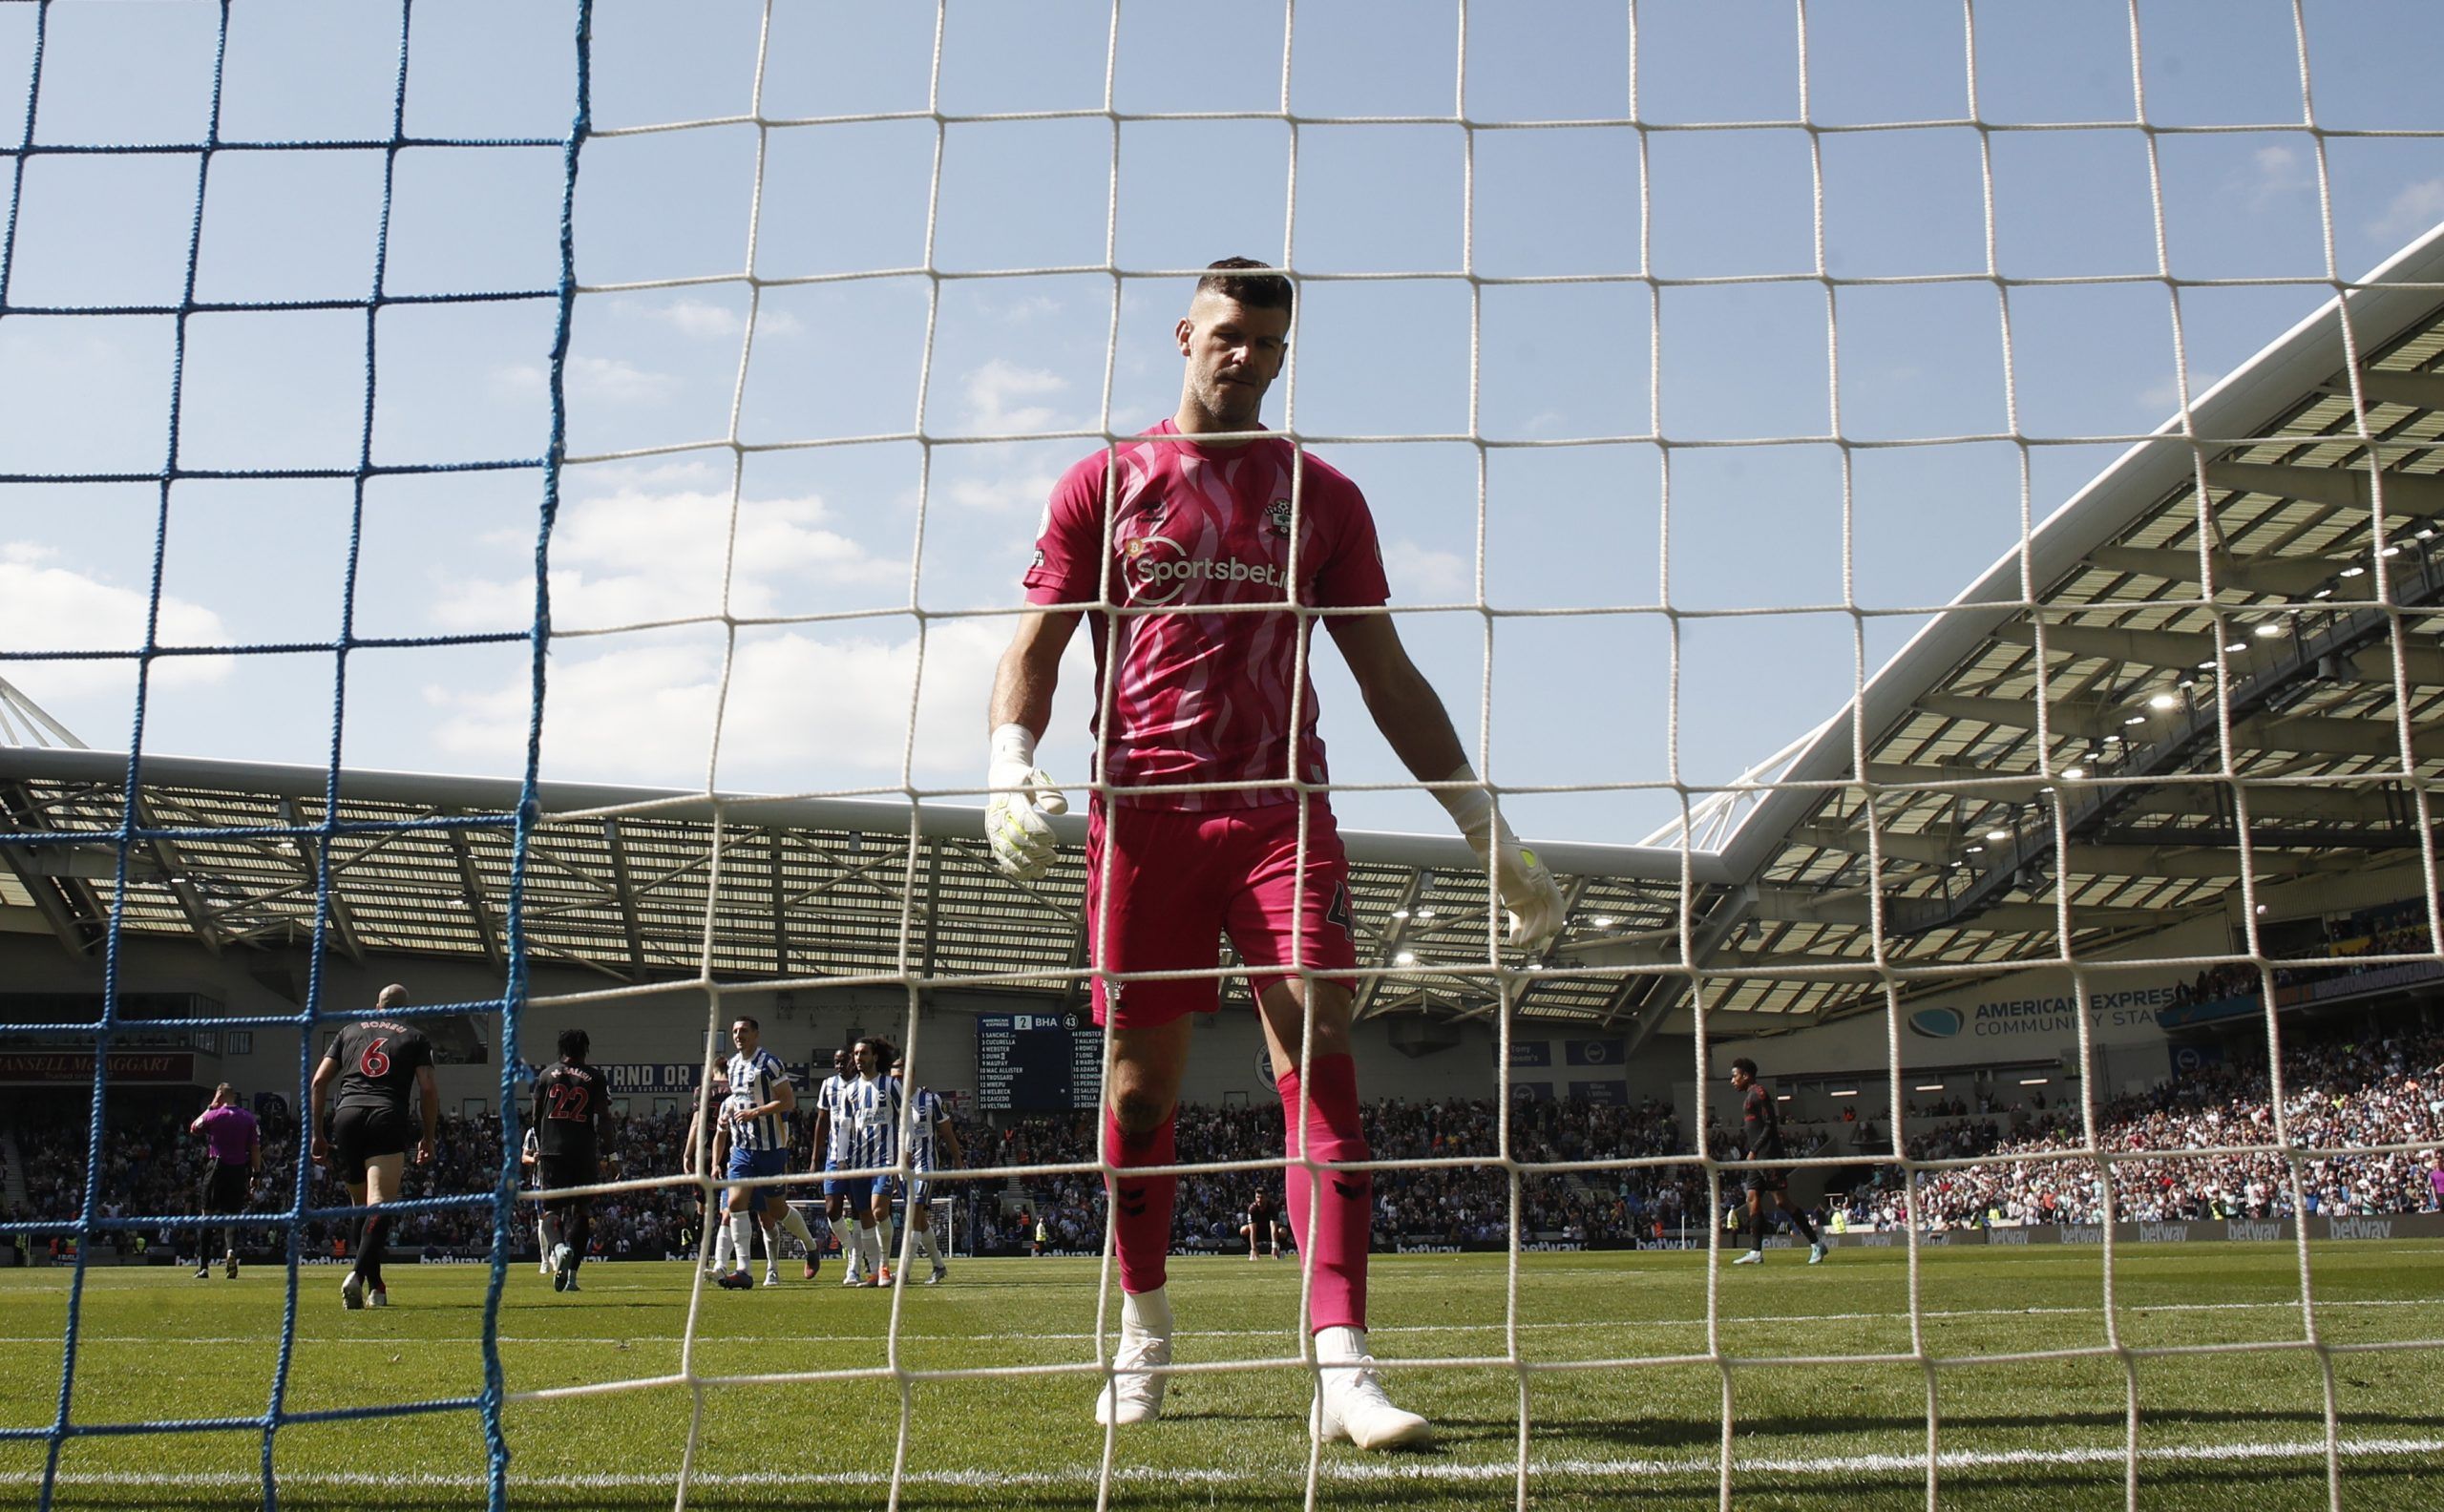 Soccer Football - Premier League - Brighton &amp; Hove Albion v Southampton - The American Express Community Stadium, Brighton, Britain - April 24, 2022  Southampton's Fraser Forster reacts after Brighton &amp; Hove Albion scored their second goal an own goal scored by Mohammed Salisu Action Images via Reuters/Andrew Couldridge EDITORIAL USE ONLY. No use with unauthorized audio, video, data, fixture lists, club/league logos or 'live' services. Online in-match use limited to 75 images, no video e